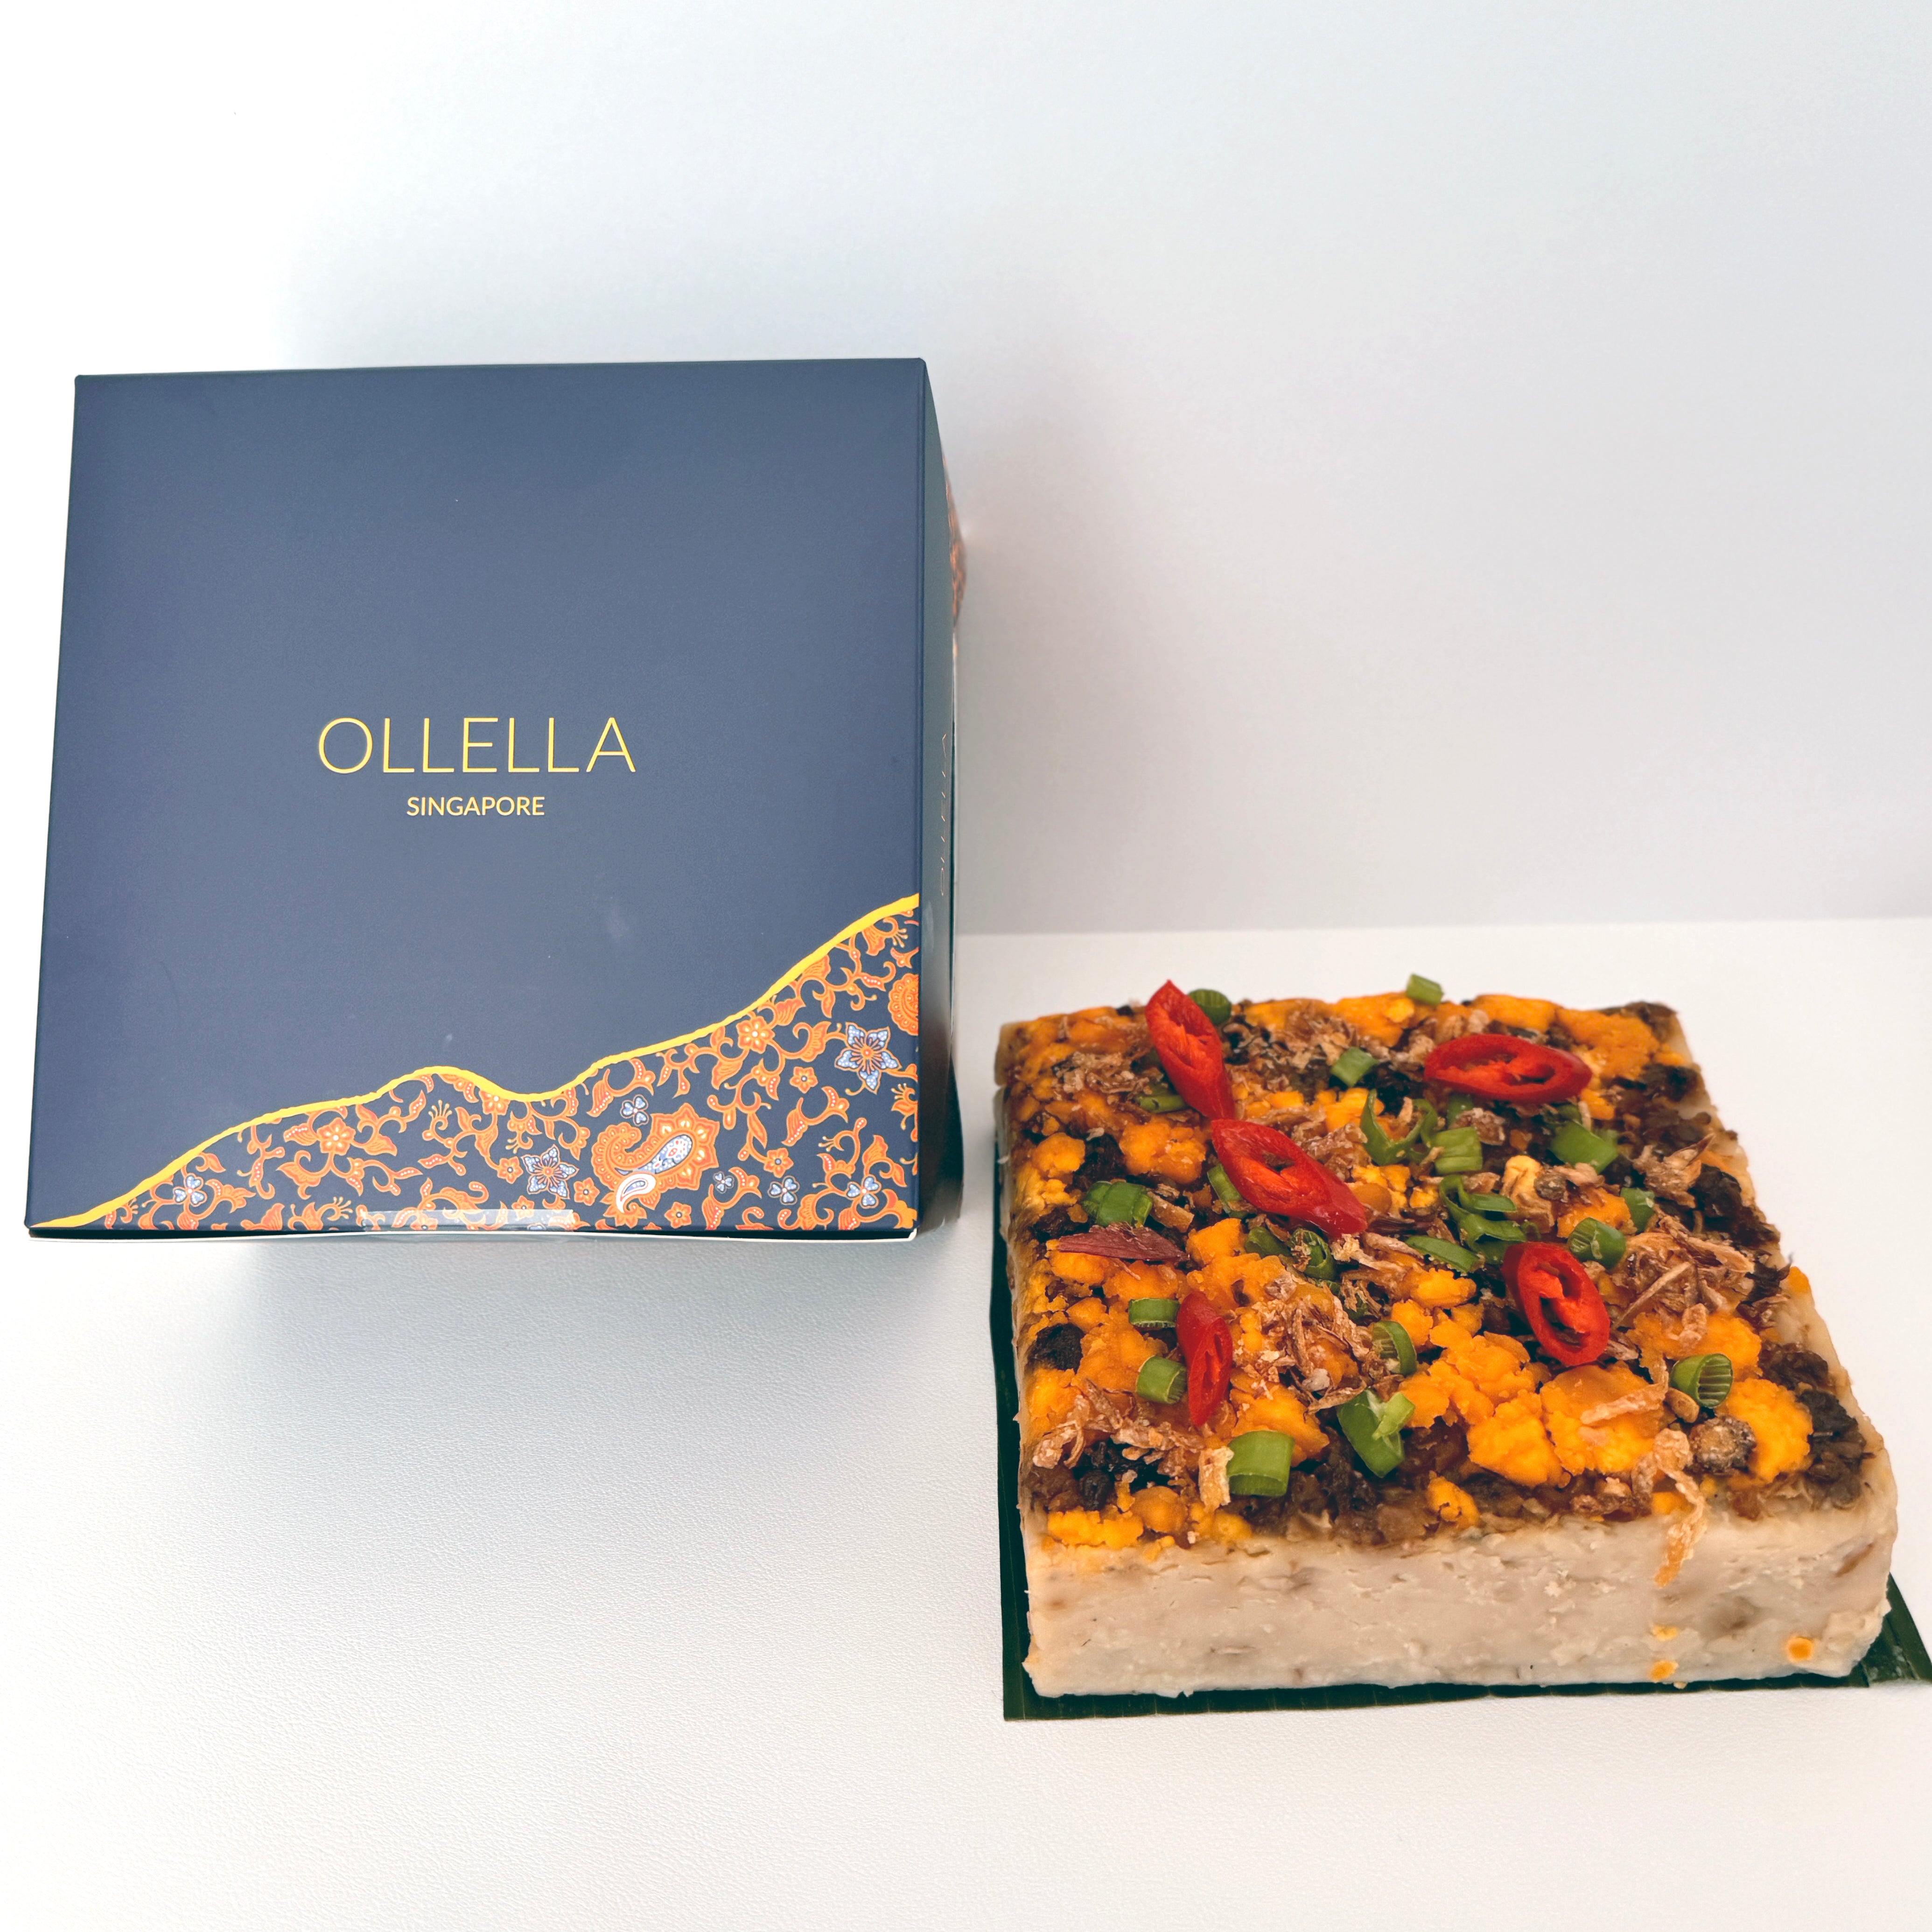 OLLELLA Kueh + Floral Bouquet in MaMa Jute Bag (10, 11, 12 May only)